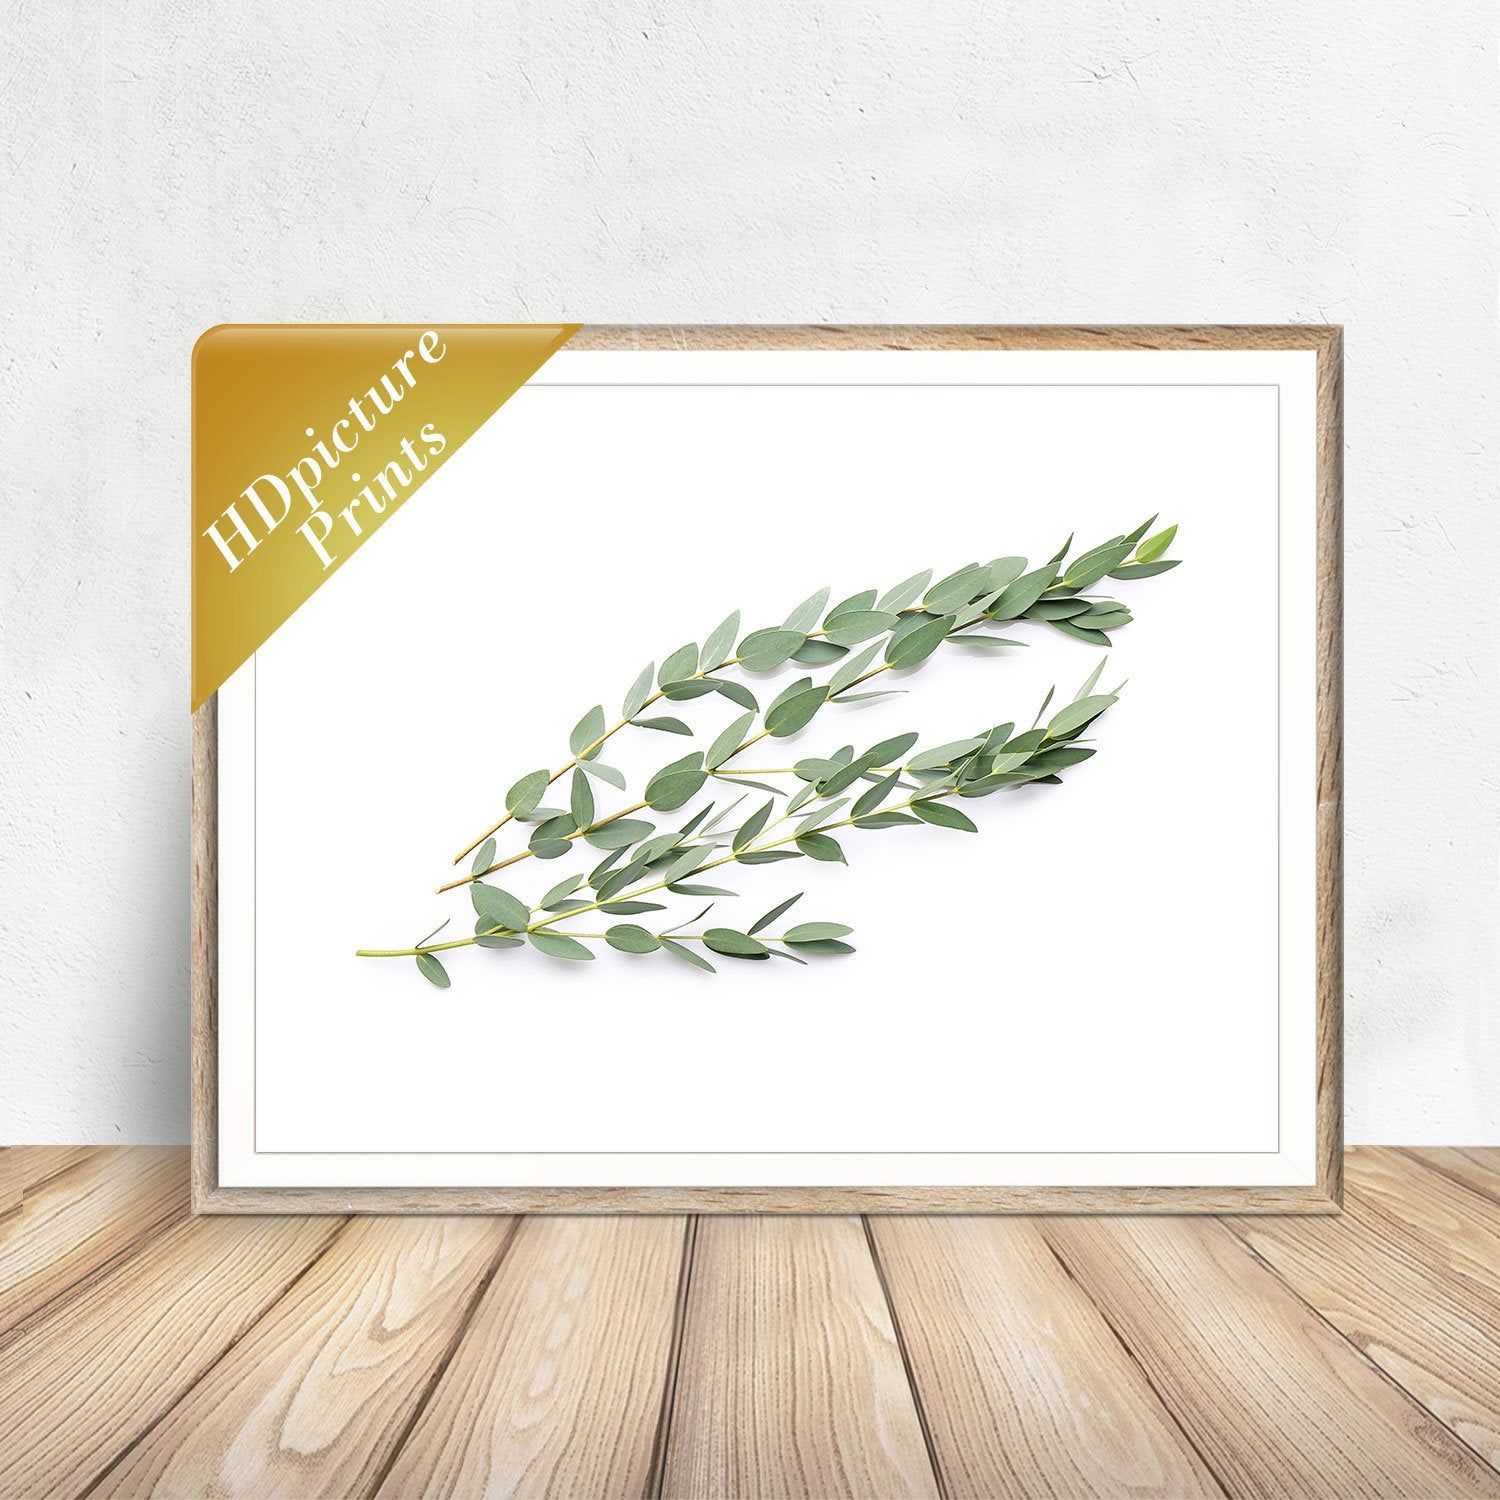 Leaf Print,Australian Eucalyptus Branch Wall Art,Tree Branch Decor,Leaf Decor,Printable Wall Art,Plant Photography Poster,Digital Download -   9 plants Photography branches ideas